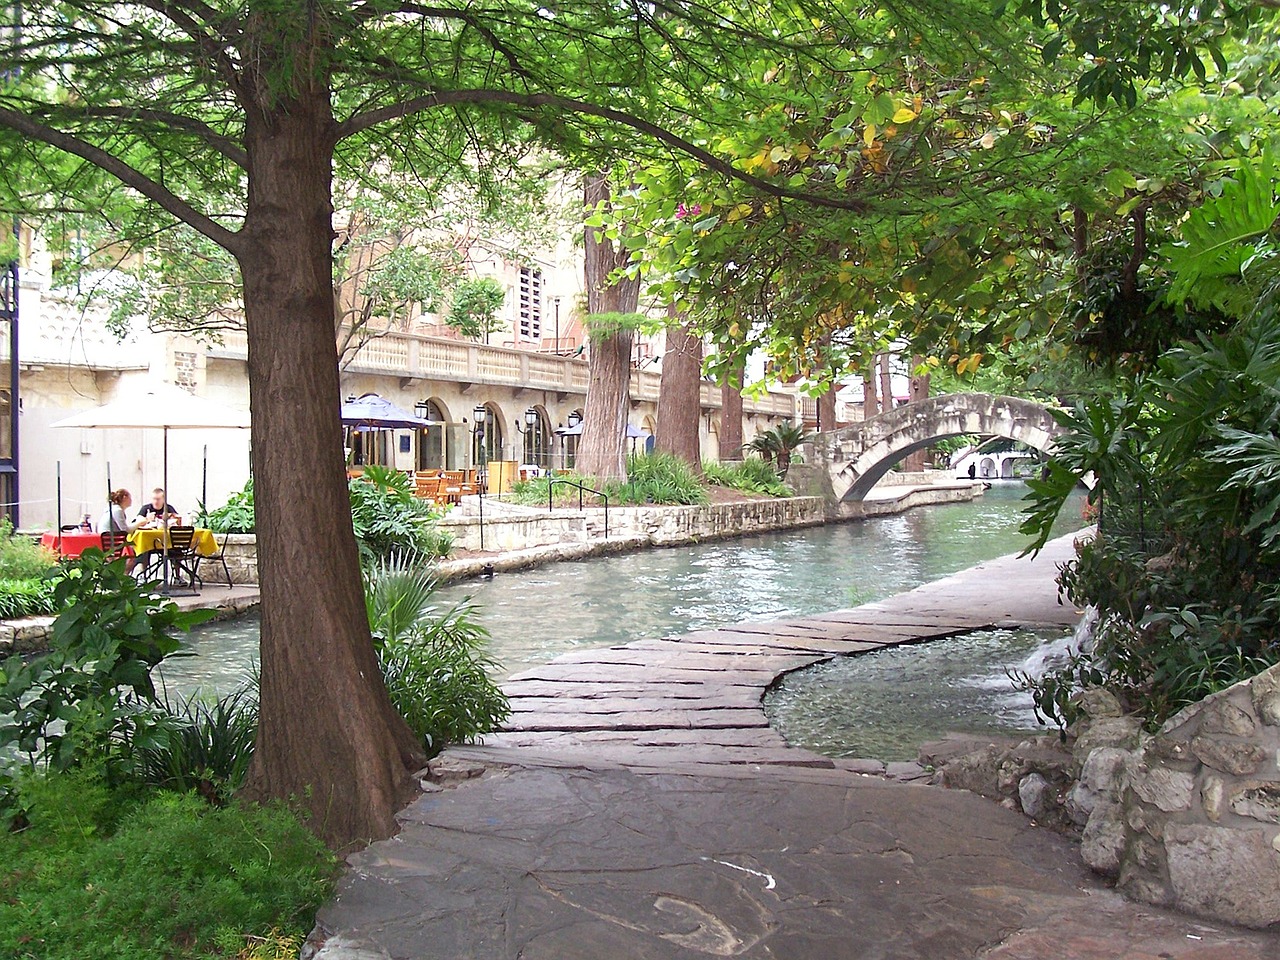 Historical Sites, Food Tours, and Outdoor Activities in San Antonio